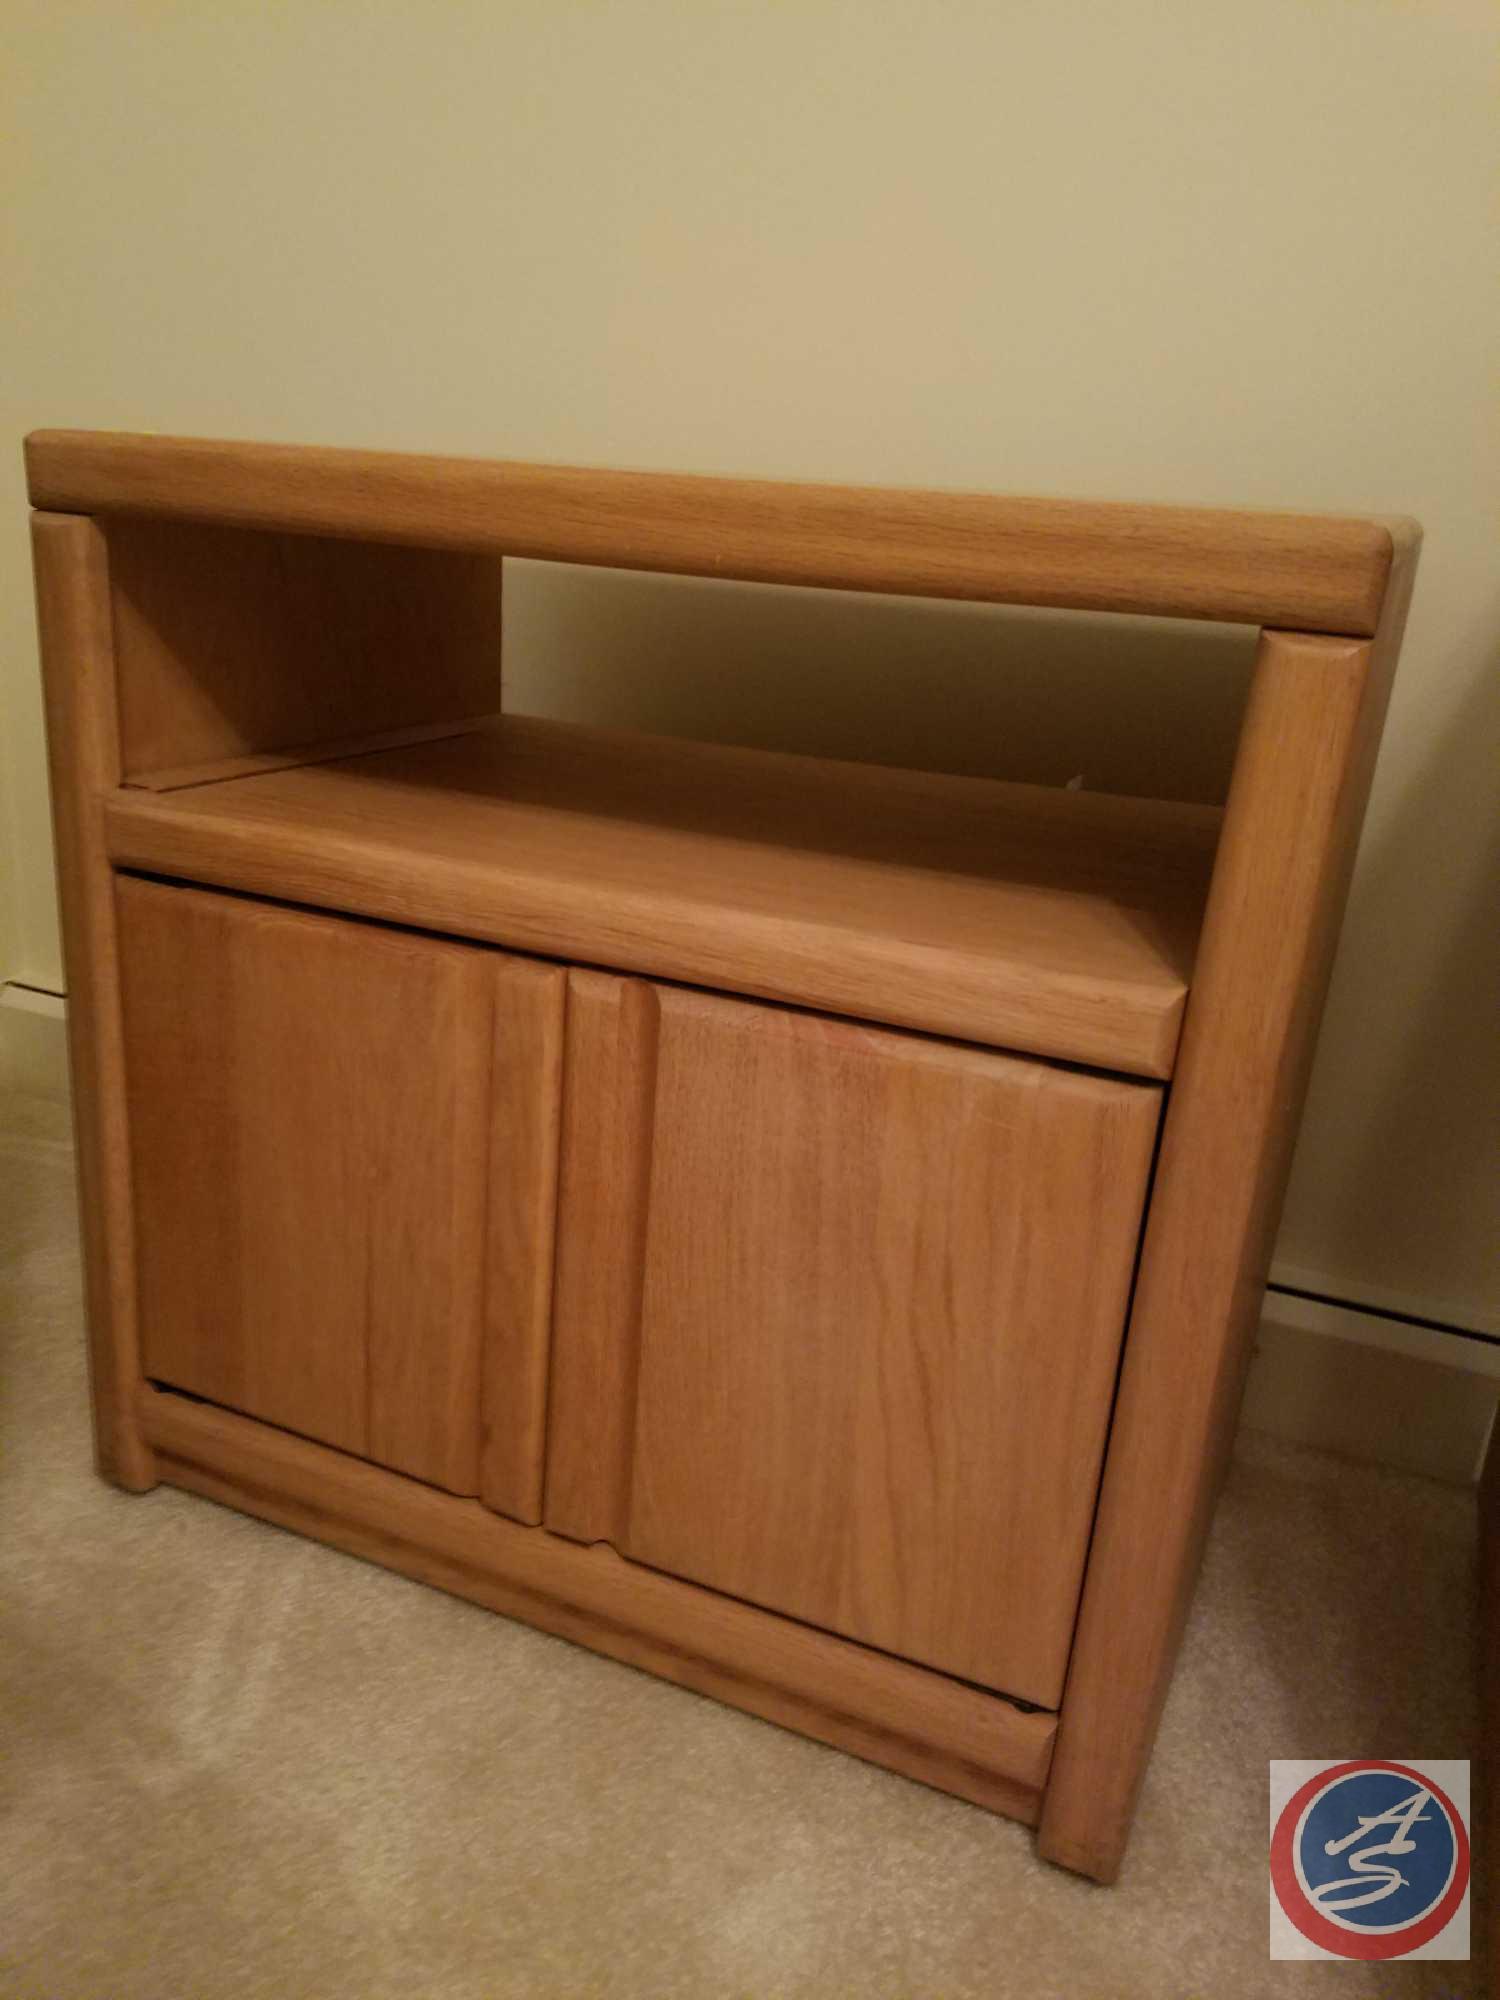 {{3XBID}} Side Table with Shelf and Cupboard 25" x 16 1/2" x 24 1/2", Hon File Cabinet with